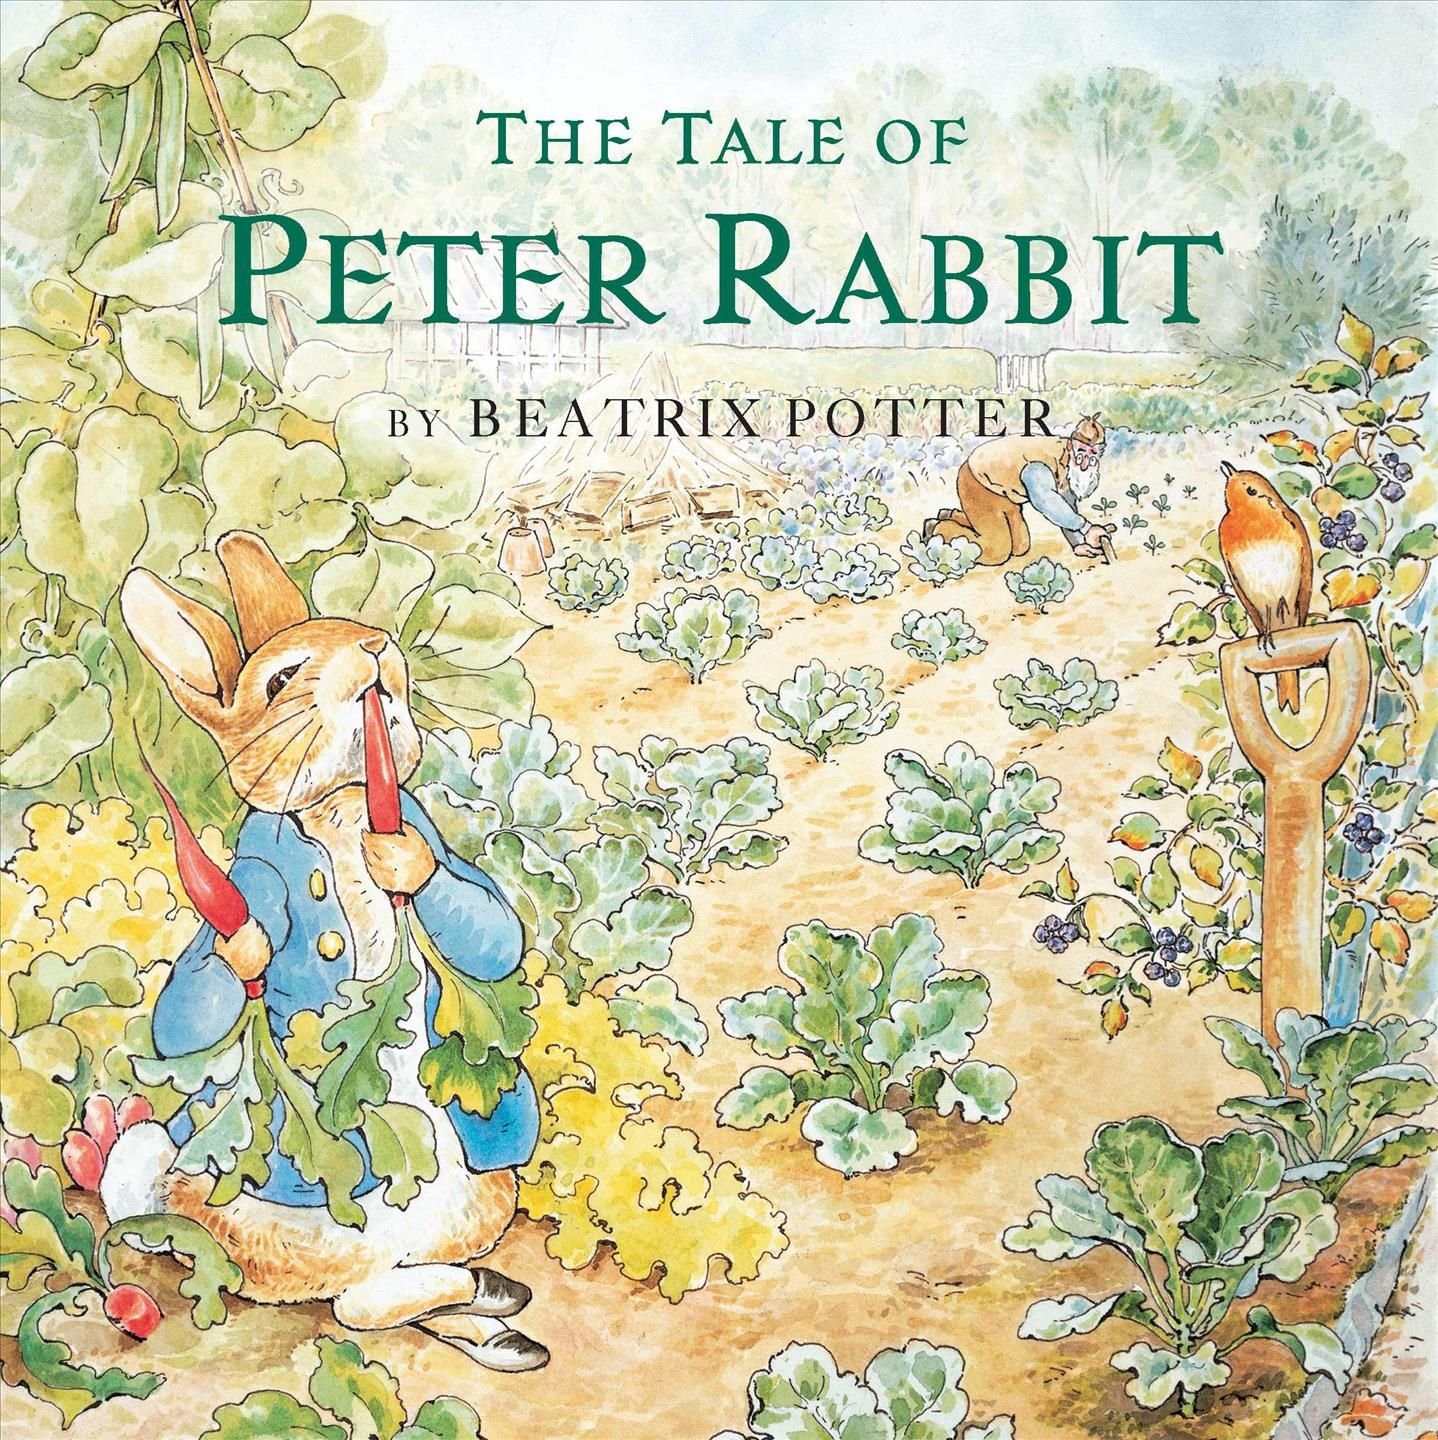 Buy　Potter　by　Peter　Tale　Free　Rabbit　With　Beatrix　of　Delivery